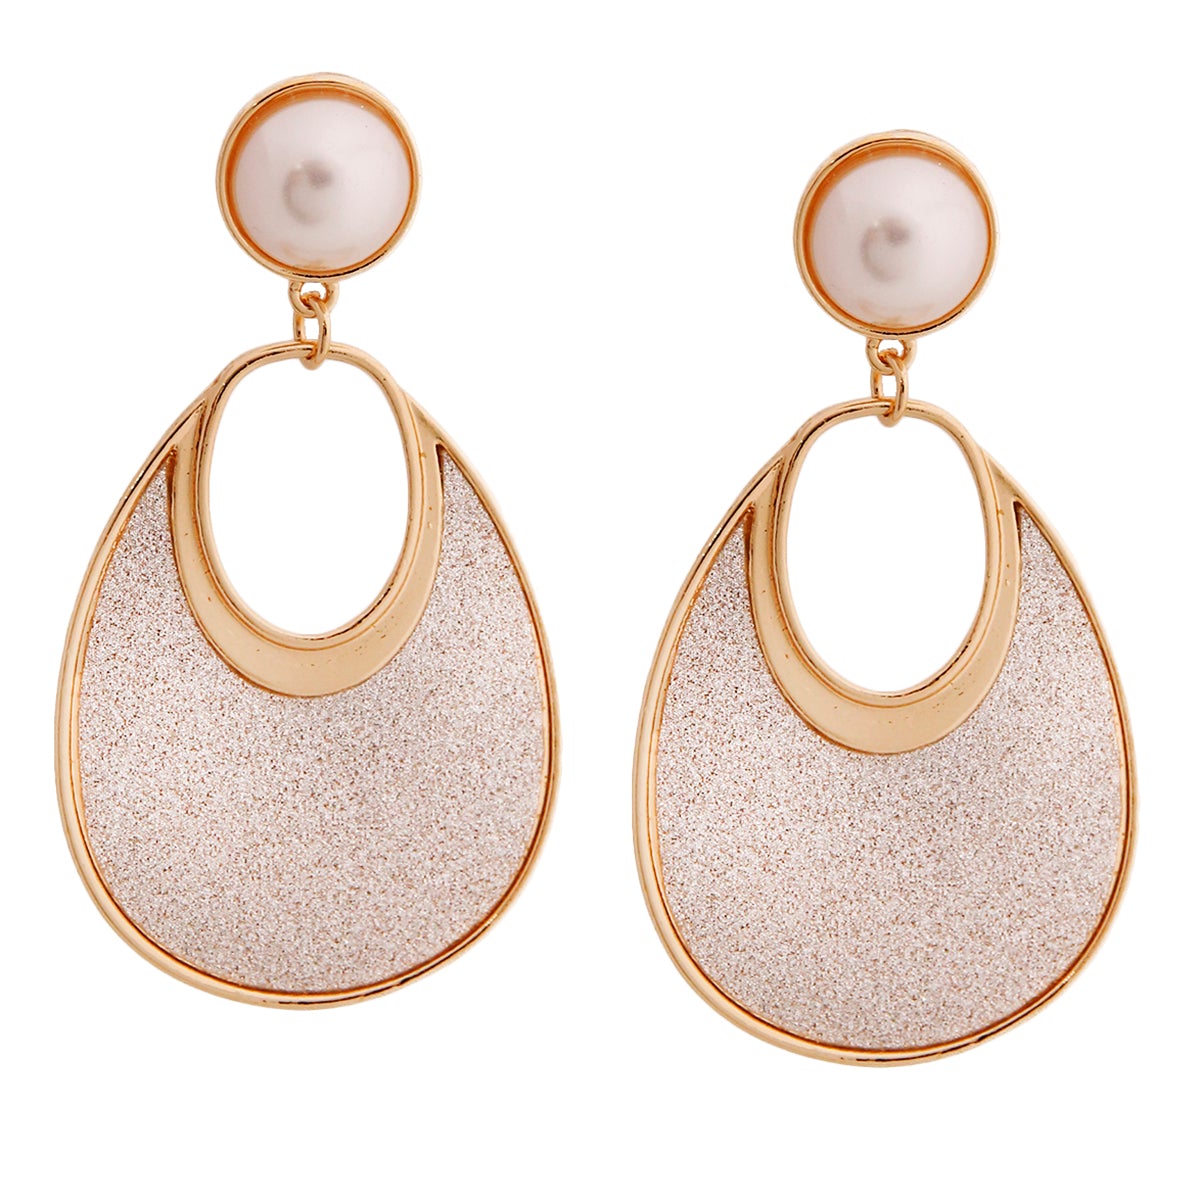 Pearl and Glitter Gold Earrings